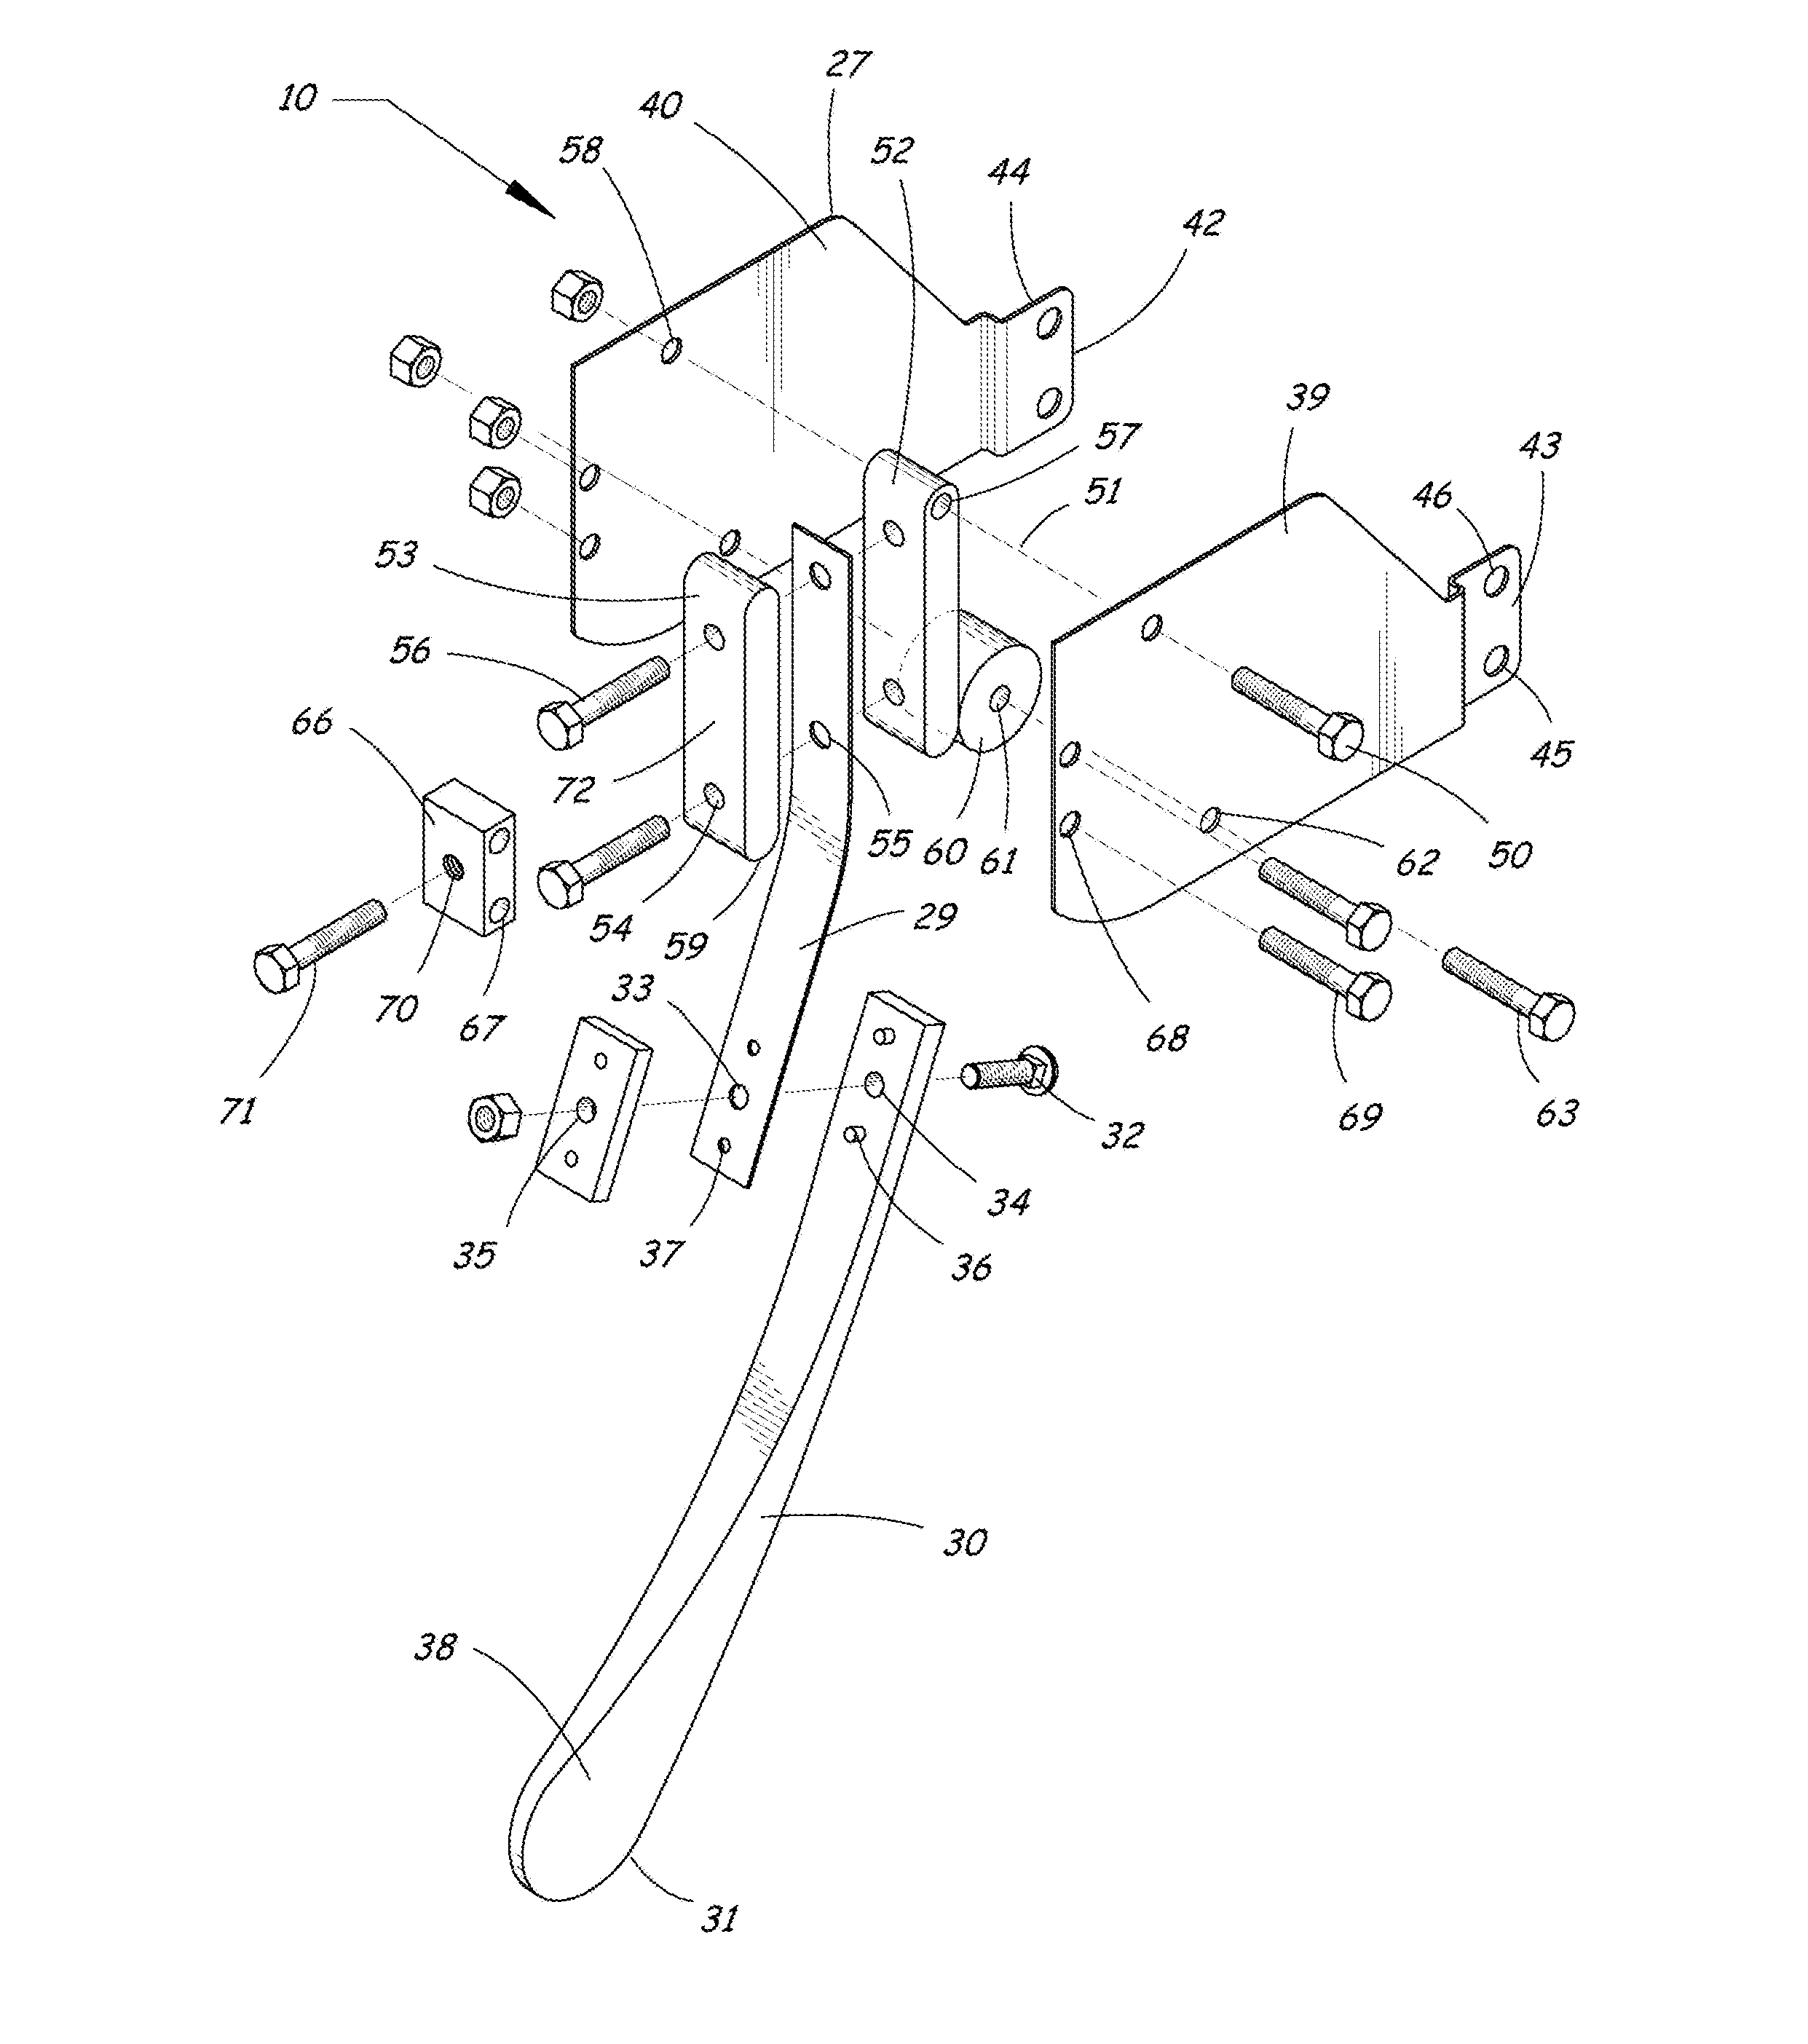 Seed firming assembly for agricultural seeders and mounting system therefor